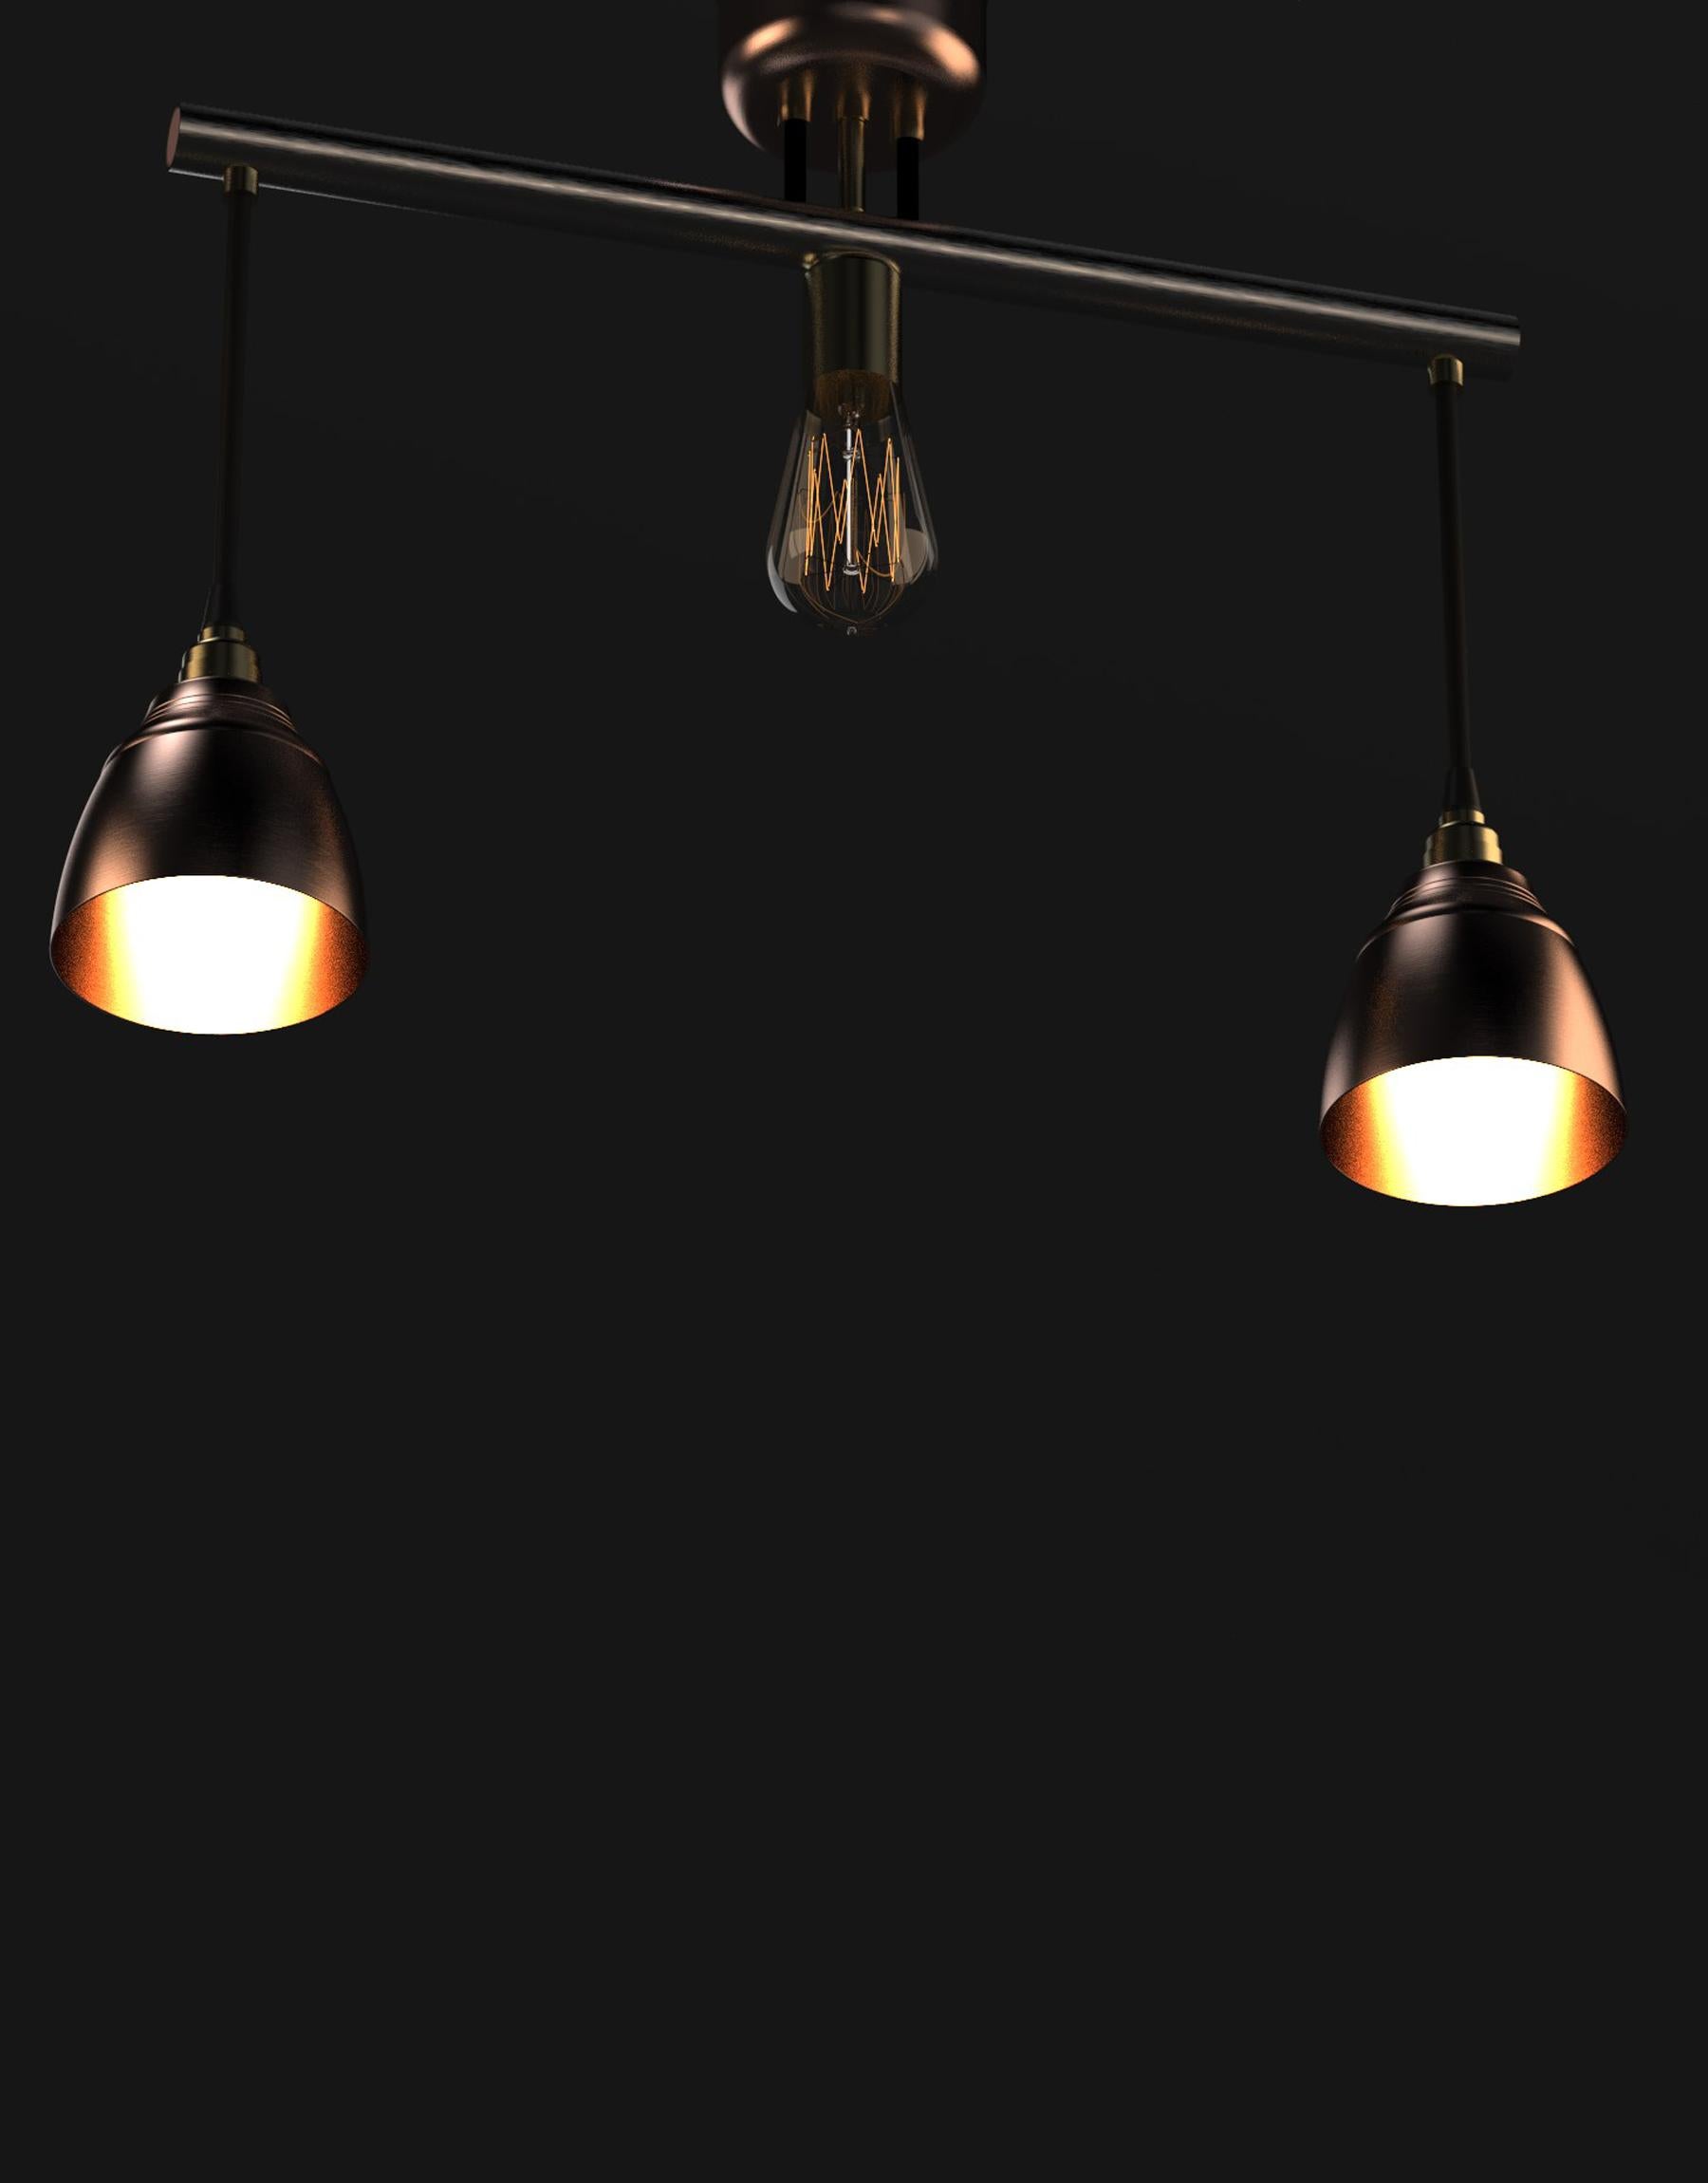 This pendant made from genuine copper and stainless steel grade 304L is our interpretation of an industrial type lighting. The presence of steel tubes and copper spotlights emphasizes the prestige of the raw material. A perfect combination of color